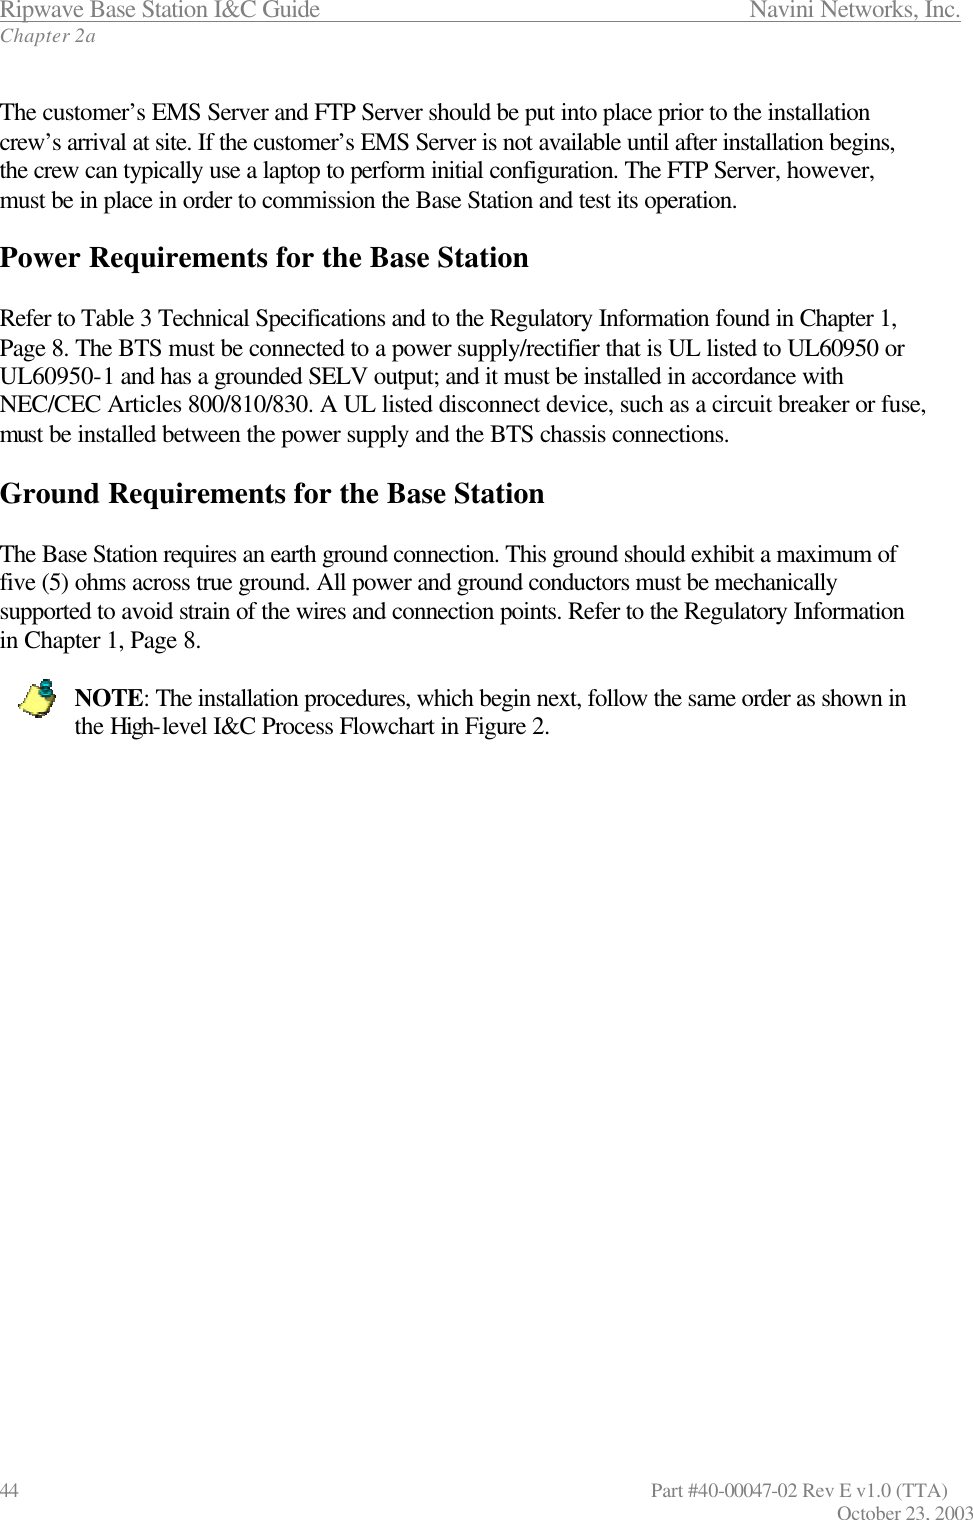 Ripwave Base Station I&amp;C Guide                 Navini Networks, Inc. Chapter 2a 44                   Part #40-00047-02 Rev E v1.0 (TTA) October 23, 2003   The customer’s EMS Server and FTP Server should be put into place prior to the installation crew’s arrival at site. If the customer’s EMS Server is not available until after installation begins, the crew can typically use a laptop to perform initial configuration. The FTP Server, however, must be in place in order to commission the Base Station and test its operation.  Power Requirements for the Base Station  Refer to Table 3 Technical Specifications and to the Regulatory Information found in Chapter 1, Page 8. The BTS must be connected to a power supply/rectifier that is UL listed to UL60950 or UL60950-1 and has a grounded SELV output; and it must be installed in accordance with NEC/CEC Articles 800/810/830. A UL listed disconnect device, such as a circuit breaker or fuse, must be installed between the power supply and the BTS chassis connections.  Ground Requirements for the Base Station  The Base Station requires an earth ground connection. This ground should exhibit a maximum of five (5) ohms across true ground. All power and ground conductors must be mechanically supported to avoid strain of the wires and connection points. Refer to the Regulatory Information in Chapter 1, Page 8.  NOTE: The installation procedures, which begin next, follow the same order as shown in the High-level I&amp;C Process Flowchart in Figure 2.     